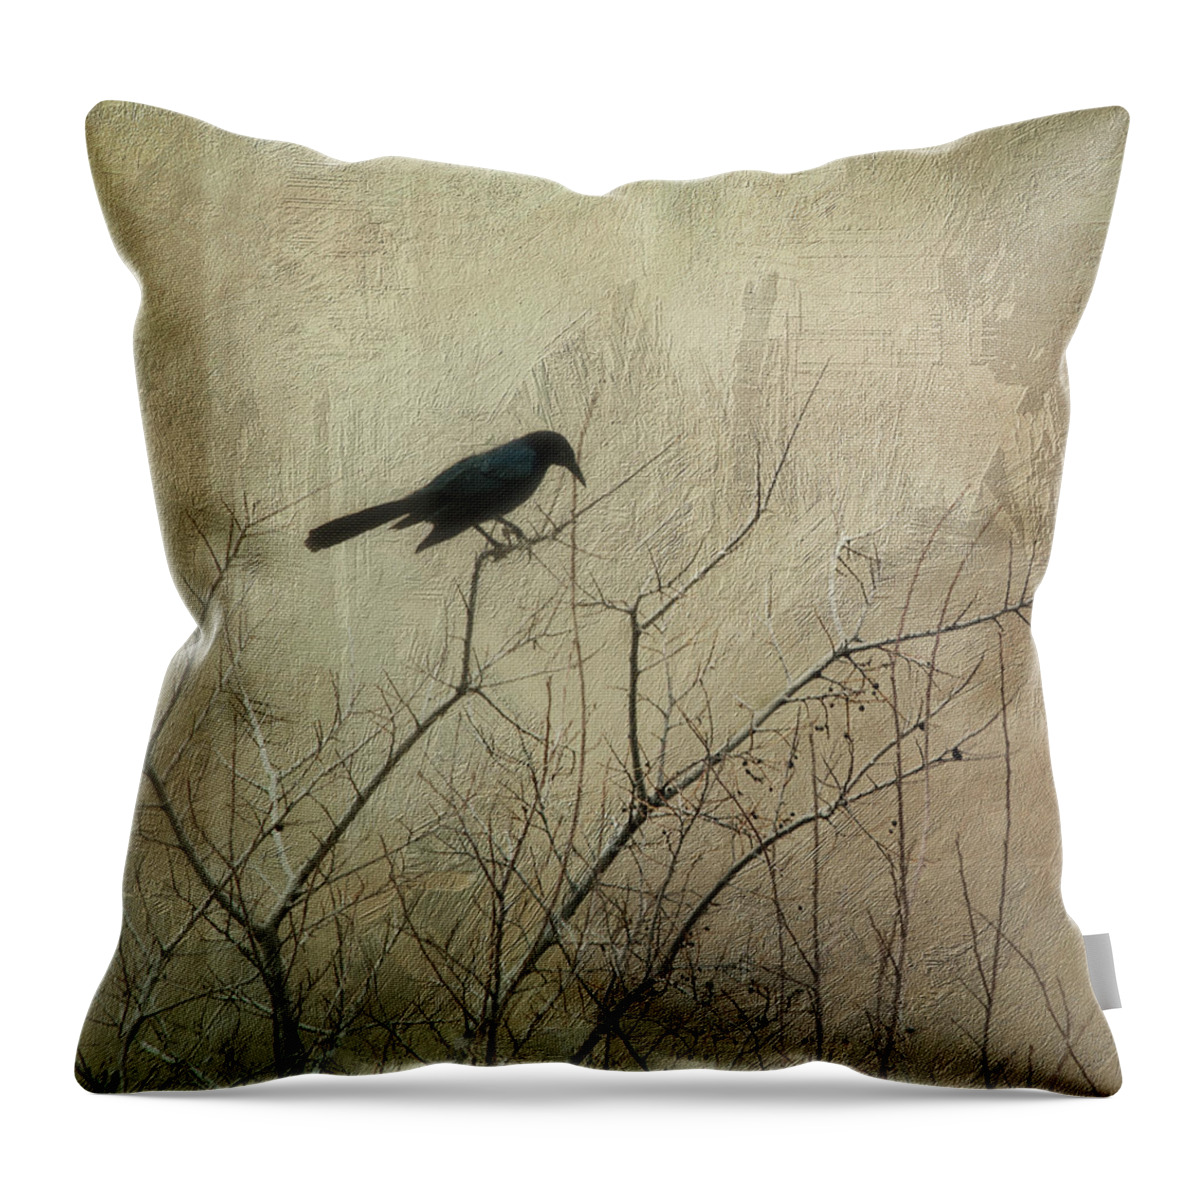 Black Color Throw Pillow featuring the photograph Black Bird On A Tree by © Suzette Rothlisberger